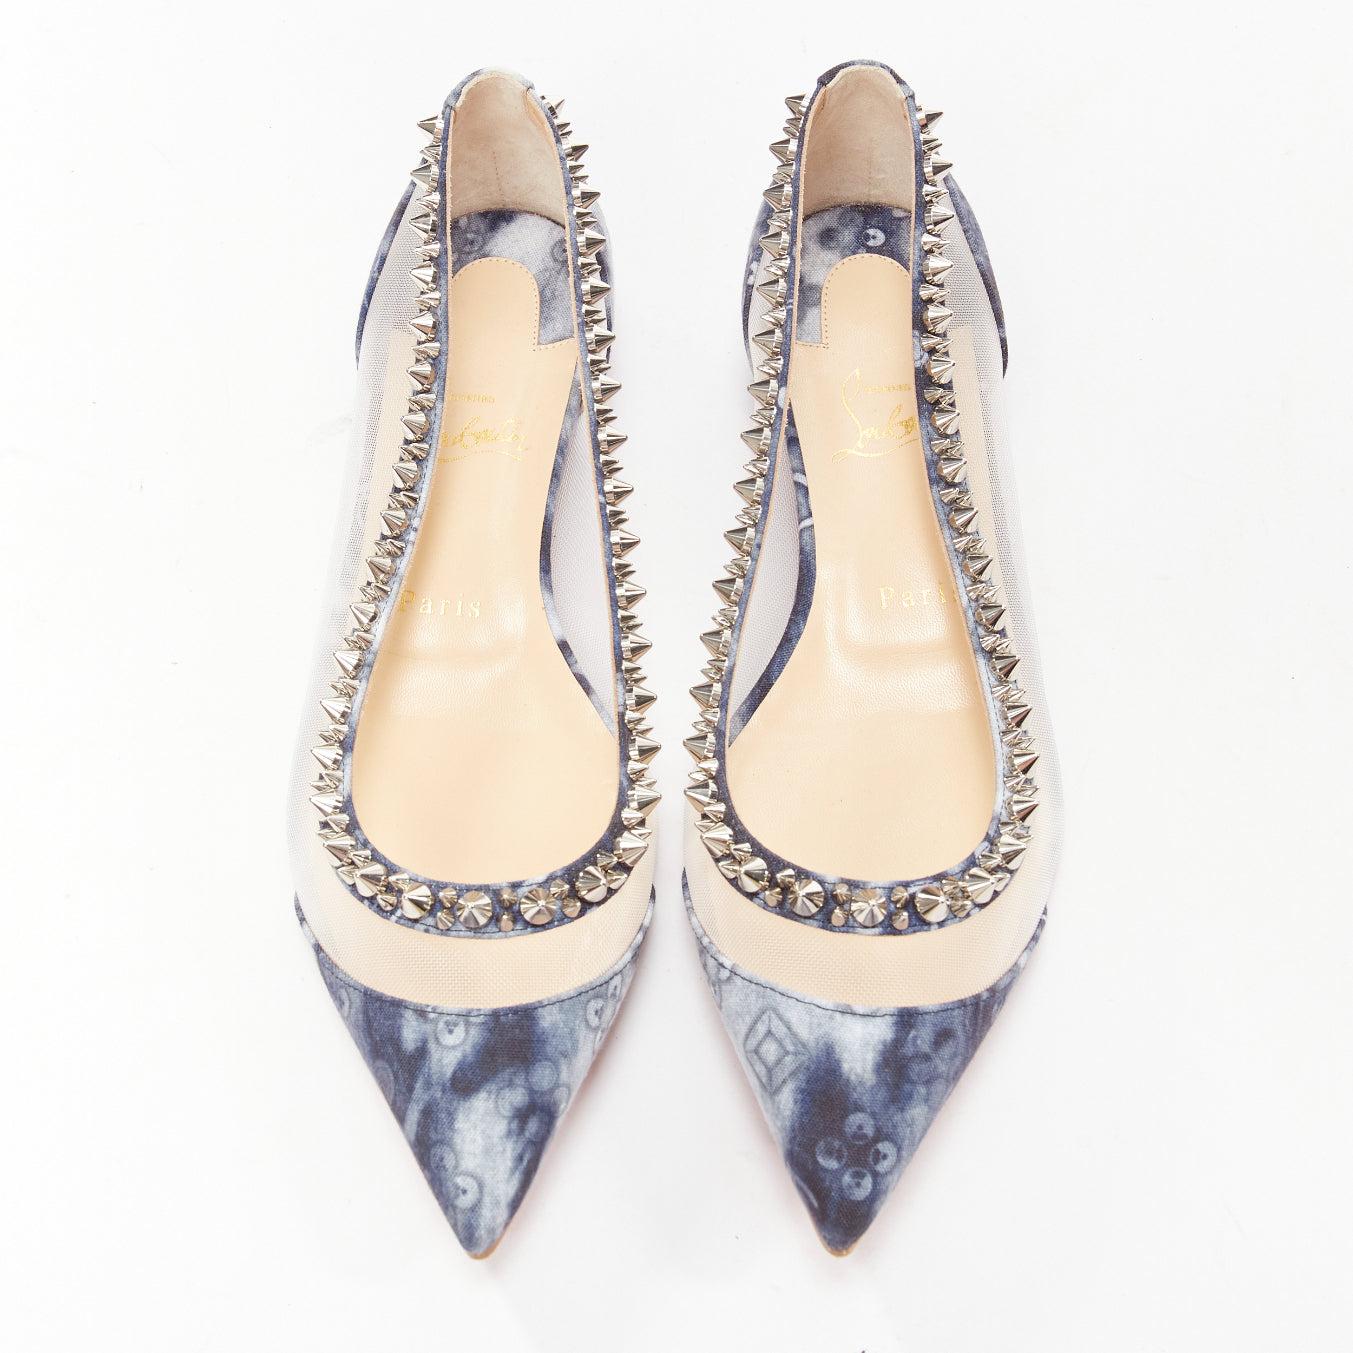 CHRISTIAN LOUBOUTIN Galativi blue CL logo denim spike rubber sole flats EU39
Reference: TGAS/D01133
Brand: Christian Louboutin
Model: Galativi
Material: Denim, Mesh
Color: Blue, Clear
Pattern: Tie Dye
Closure: Slip On
Lining: Nude Leather
Extra